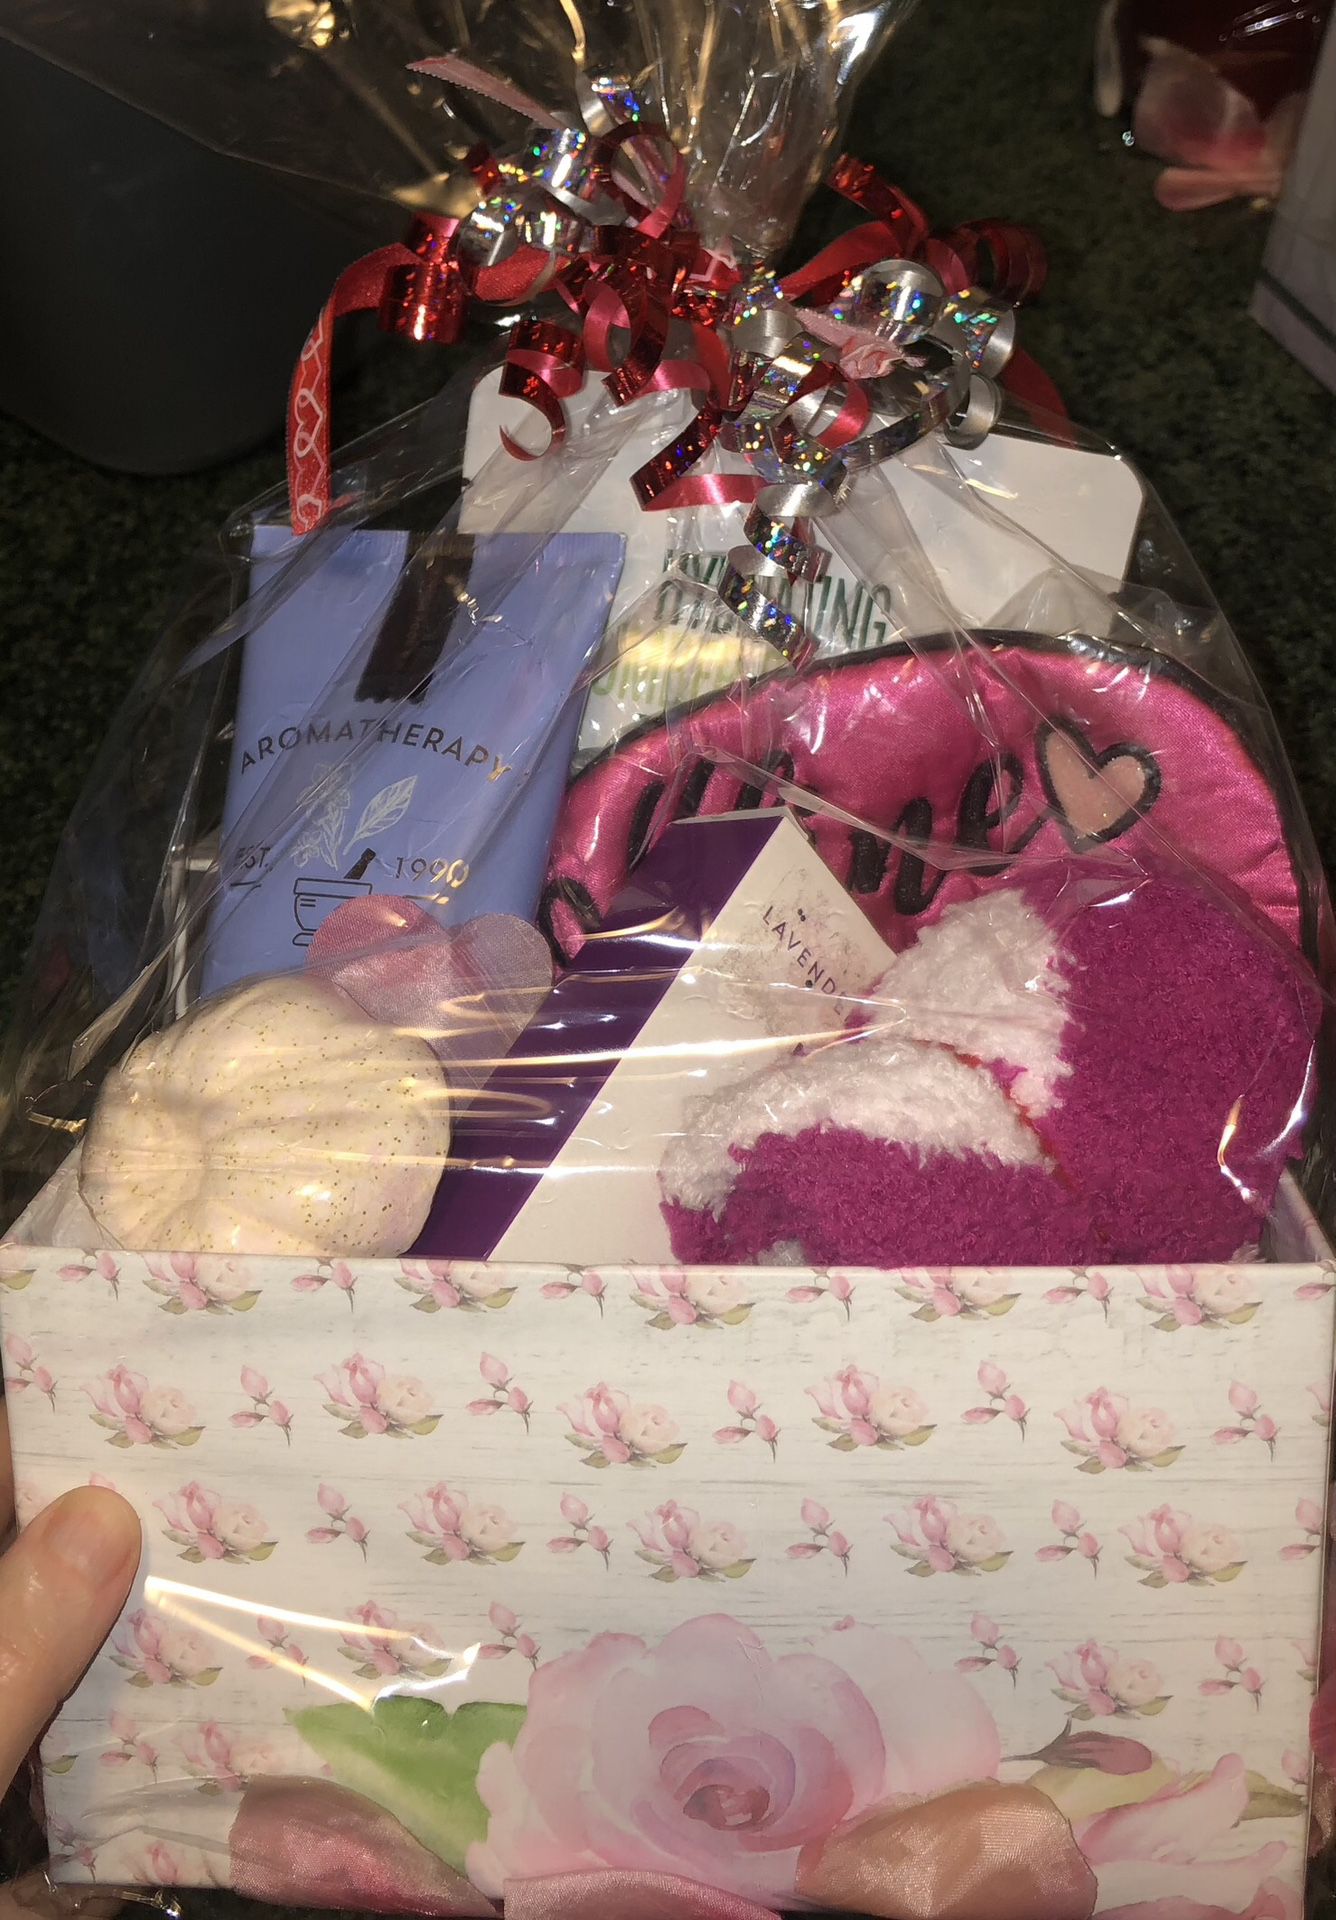 LADIES BATH AND BODY GIFT BASKET NEW!